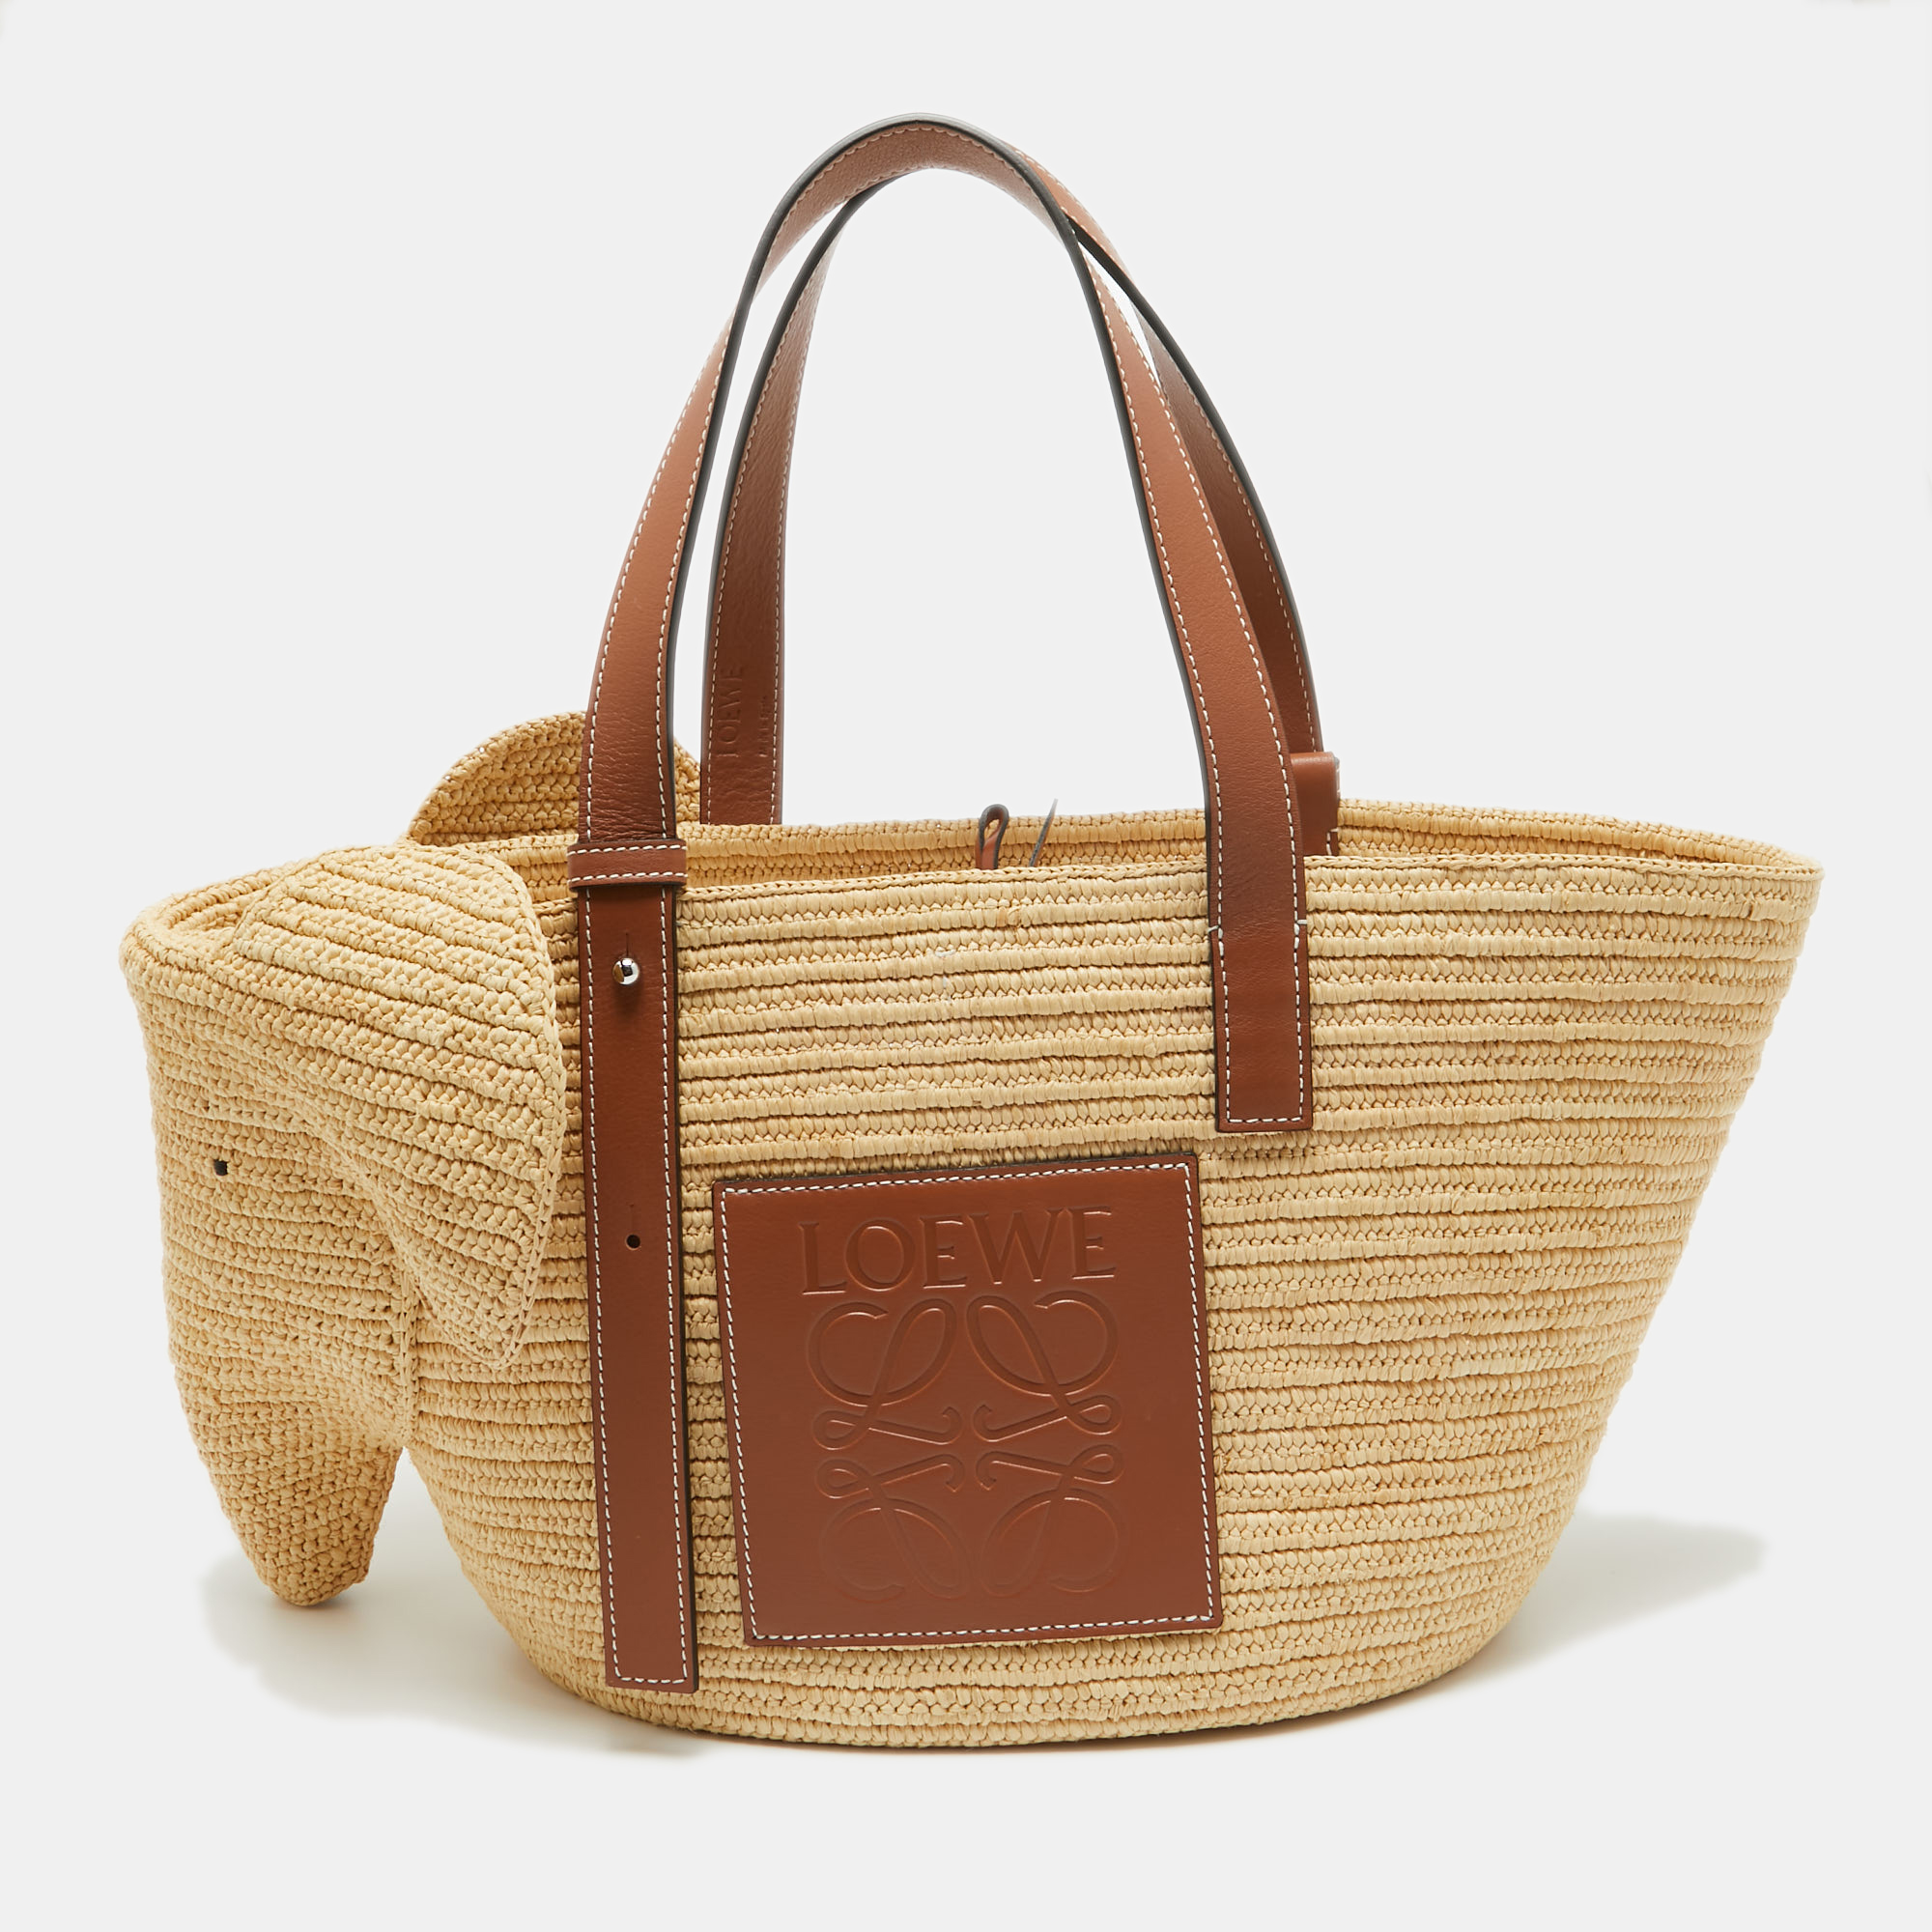 Loewe Brown/Natural Palm Leaf and Leather Elephant Basket Tote